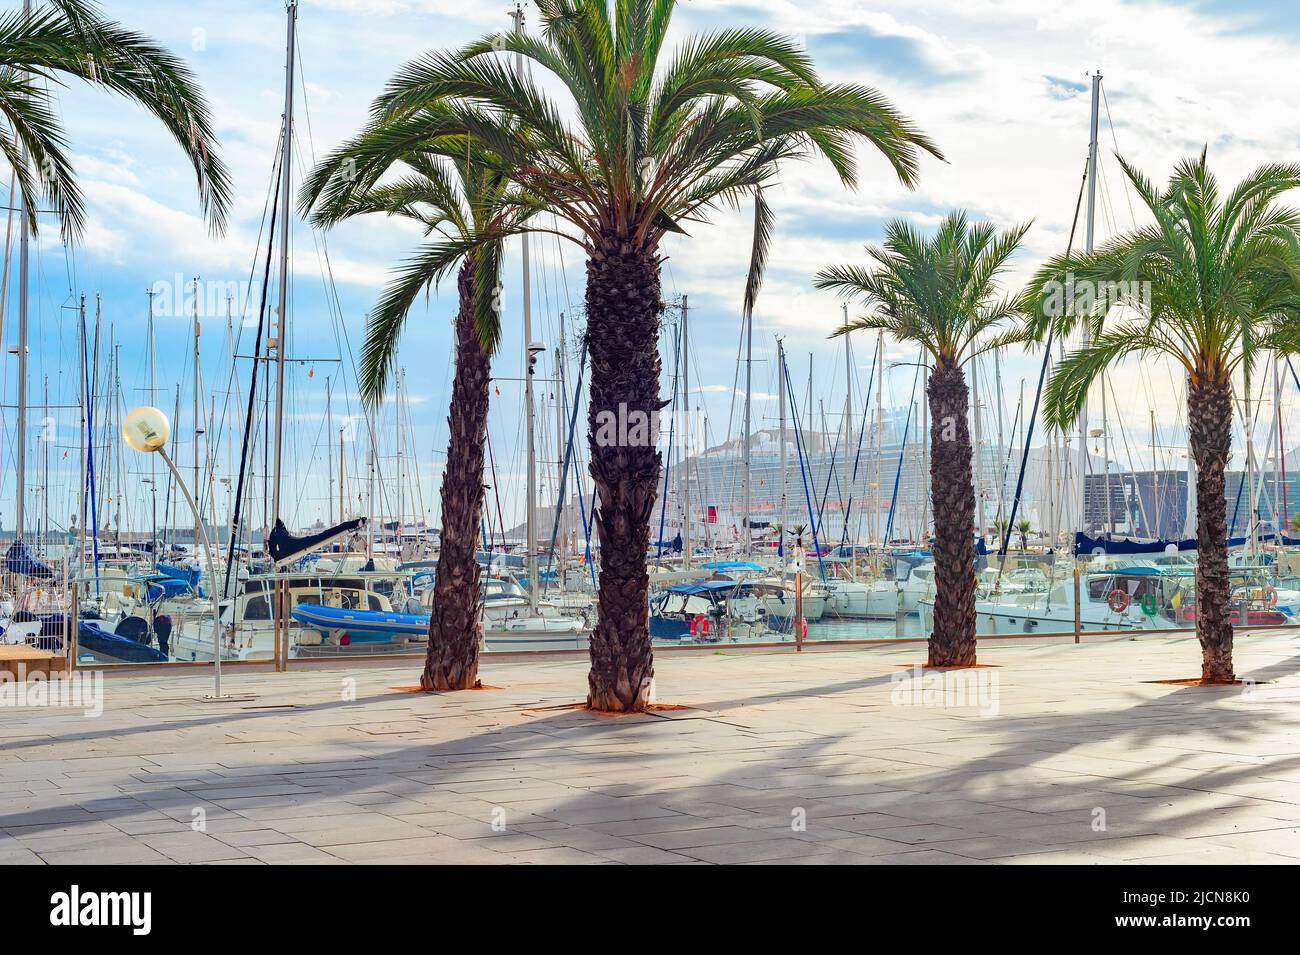 Palms at the promenade by marina with moored yachts and motorboats, cruise ship in background, Valencia, Spain Stock Photo